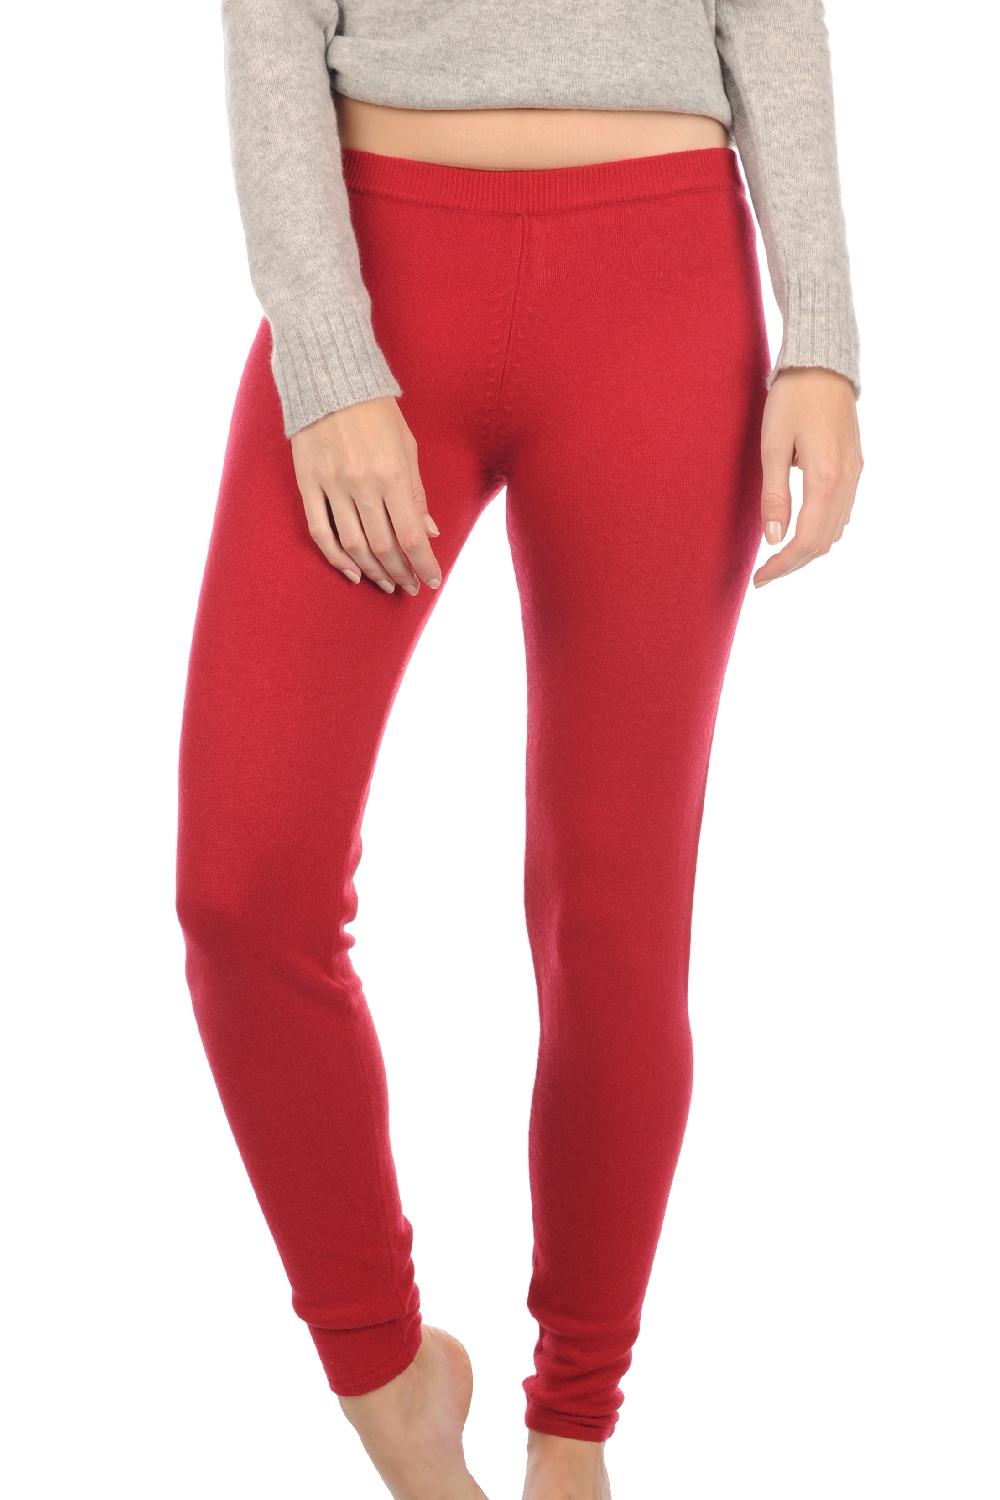 Cashmere ladies trousers leggings xelina blood red s